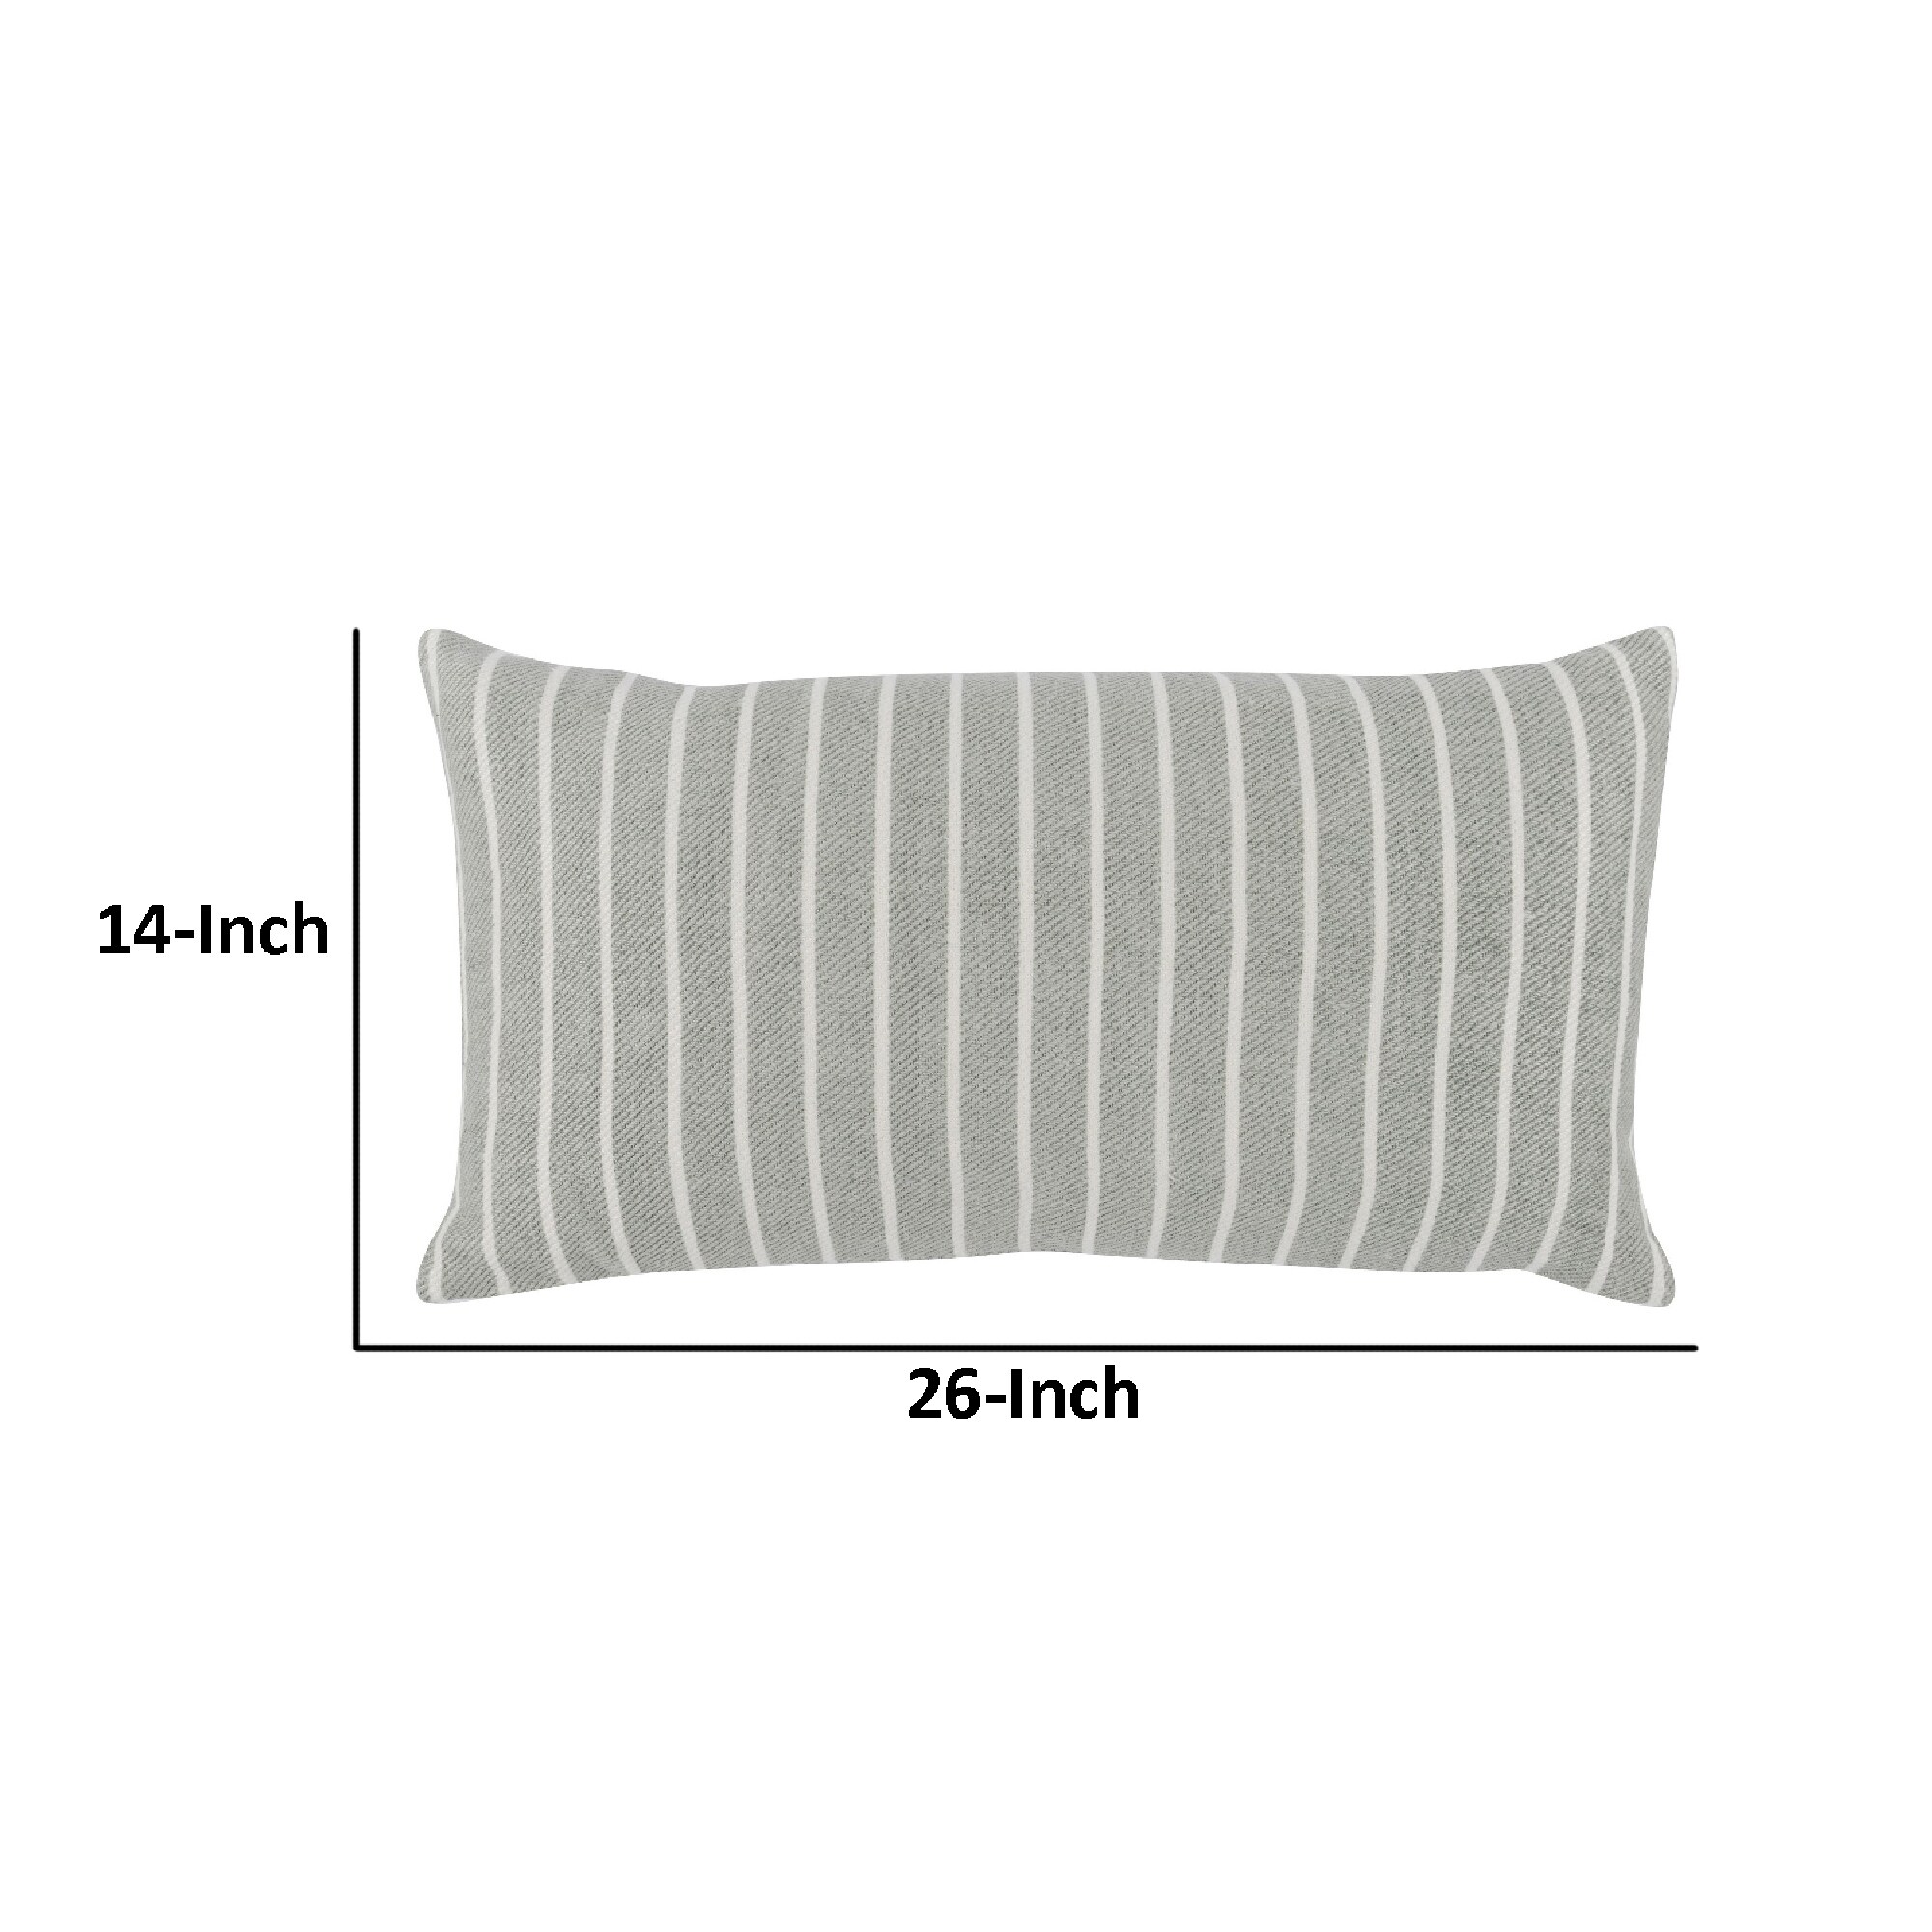 14 x 26 Accent Lumbar Pillow, Down, Striped Pattern, Gray, White Fabric